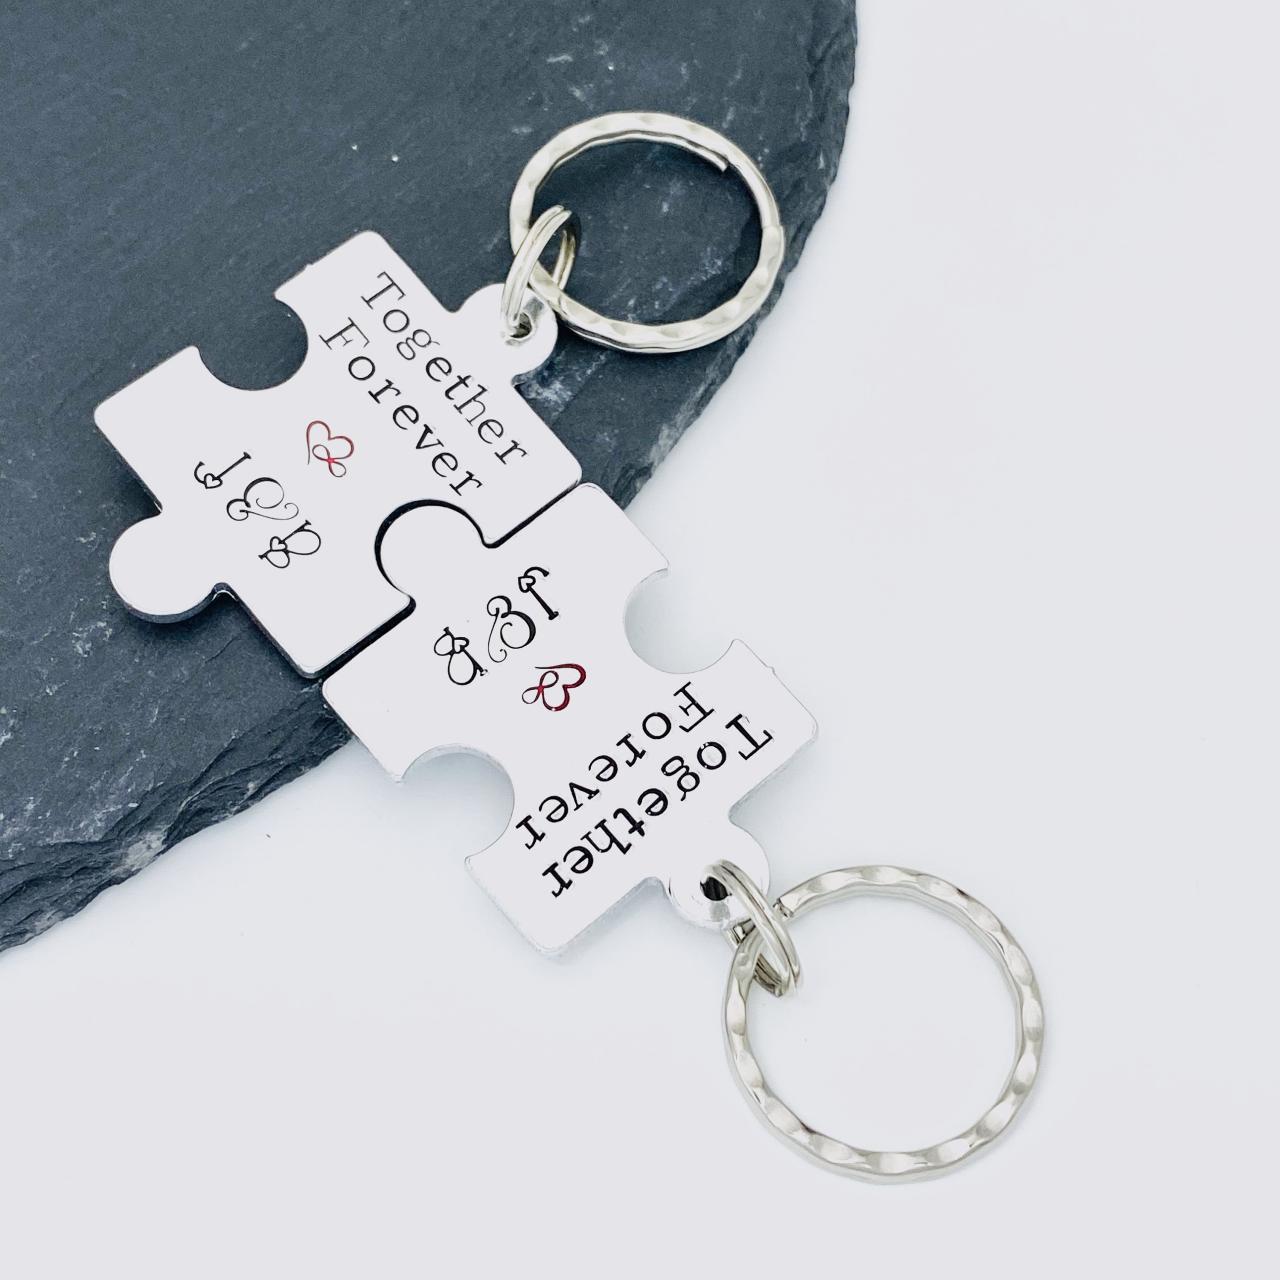 Personalised Jigsaw Keyring Keychain, Anniversary Gift, Engagement Gift, Couples Keychain, His And Hers Gifts, Valentines Gift, Autism Gift..